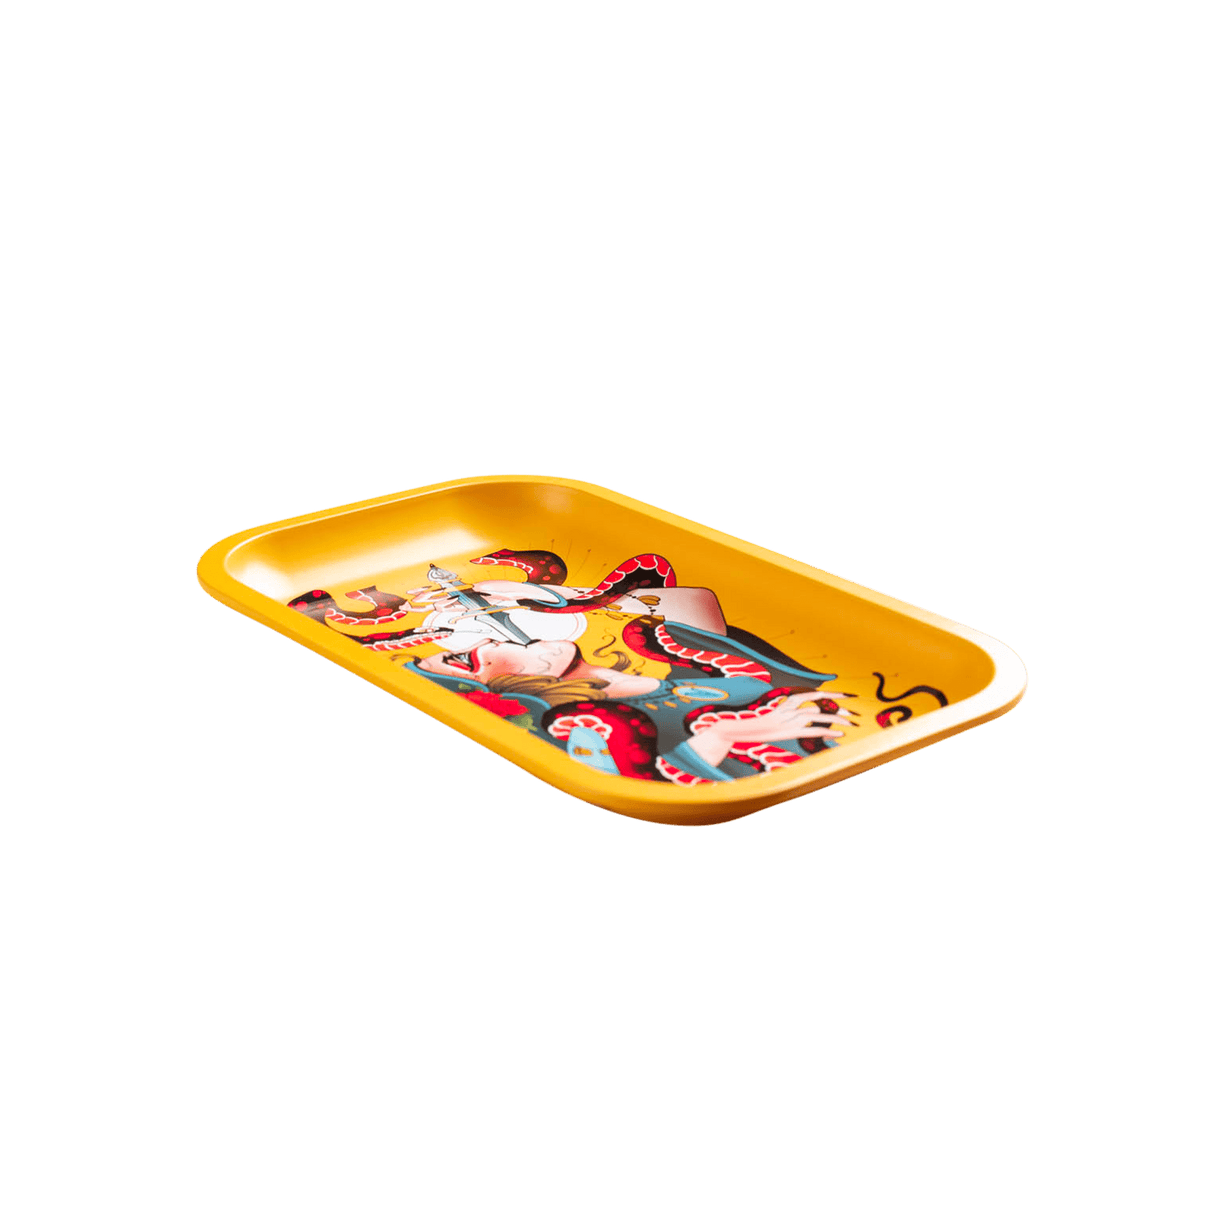 V Syndicate Serpentine Metal Rollin' Tray in Yellow with Fun & Novelty Design - Top View